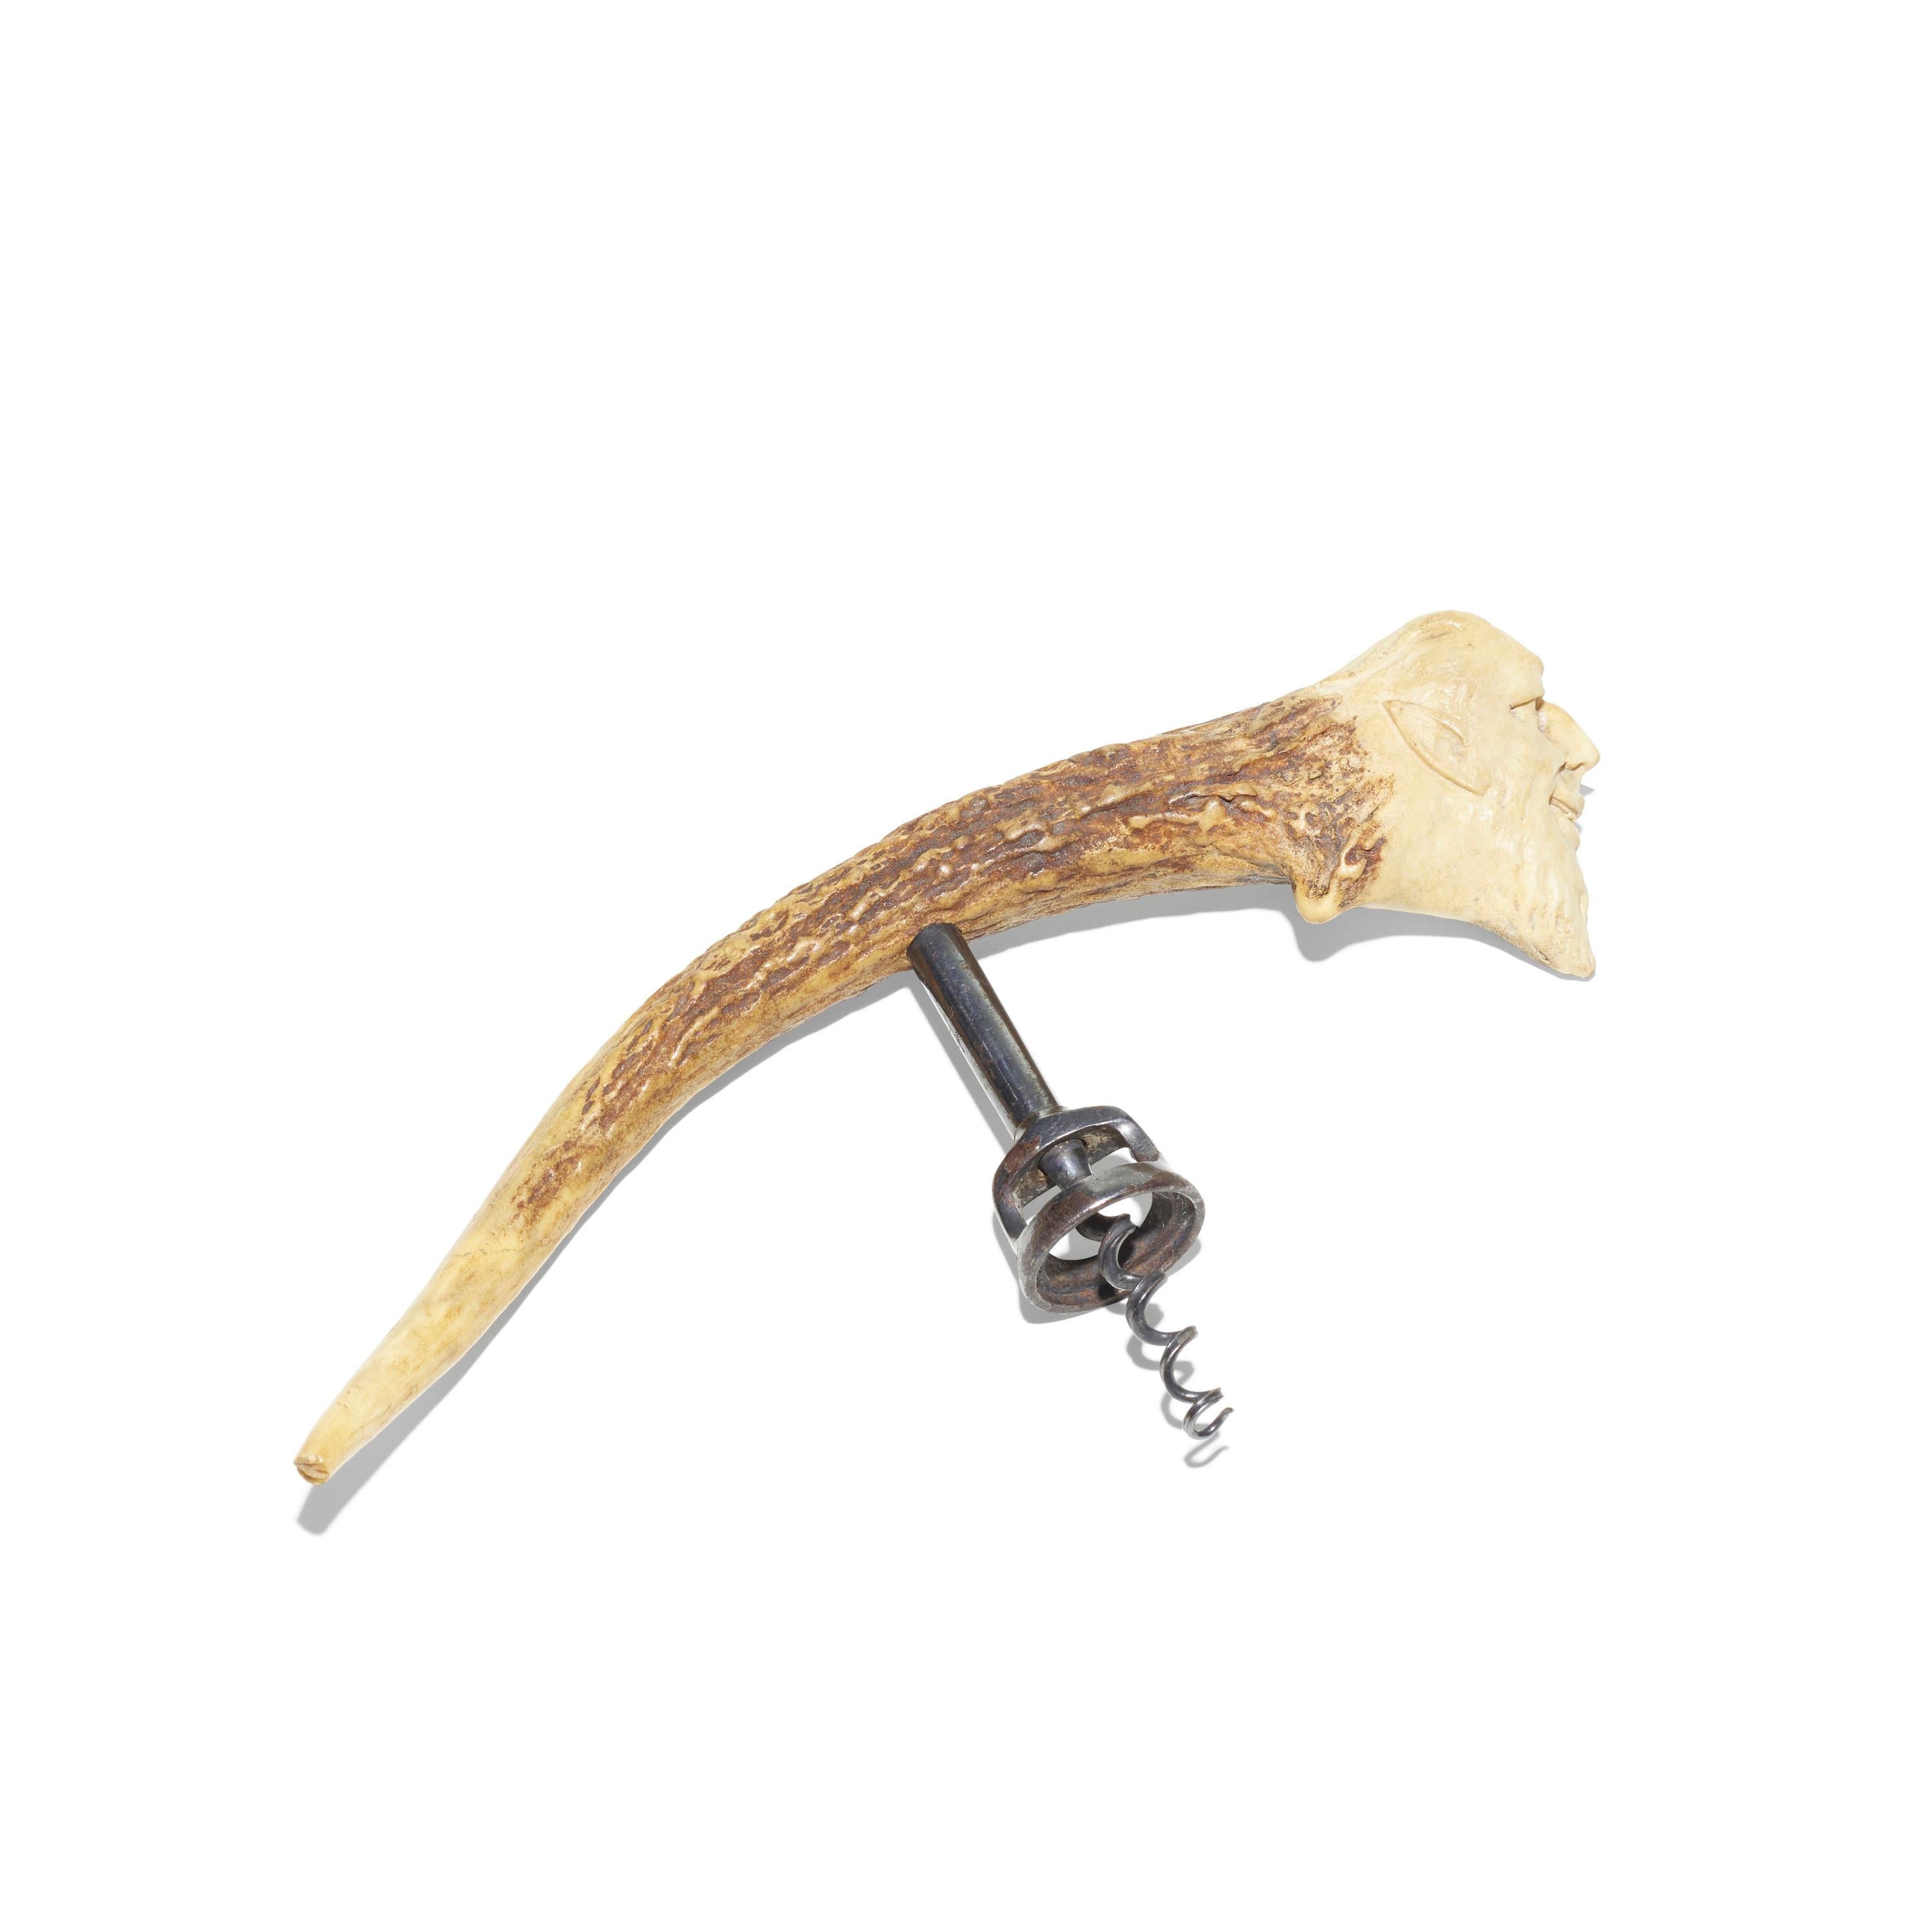 Rare corkscrew made of horn on the upper part and metal on the lower part, measuring 5'' by 9'' by 1''. The figural motif is highly realistic. 

 